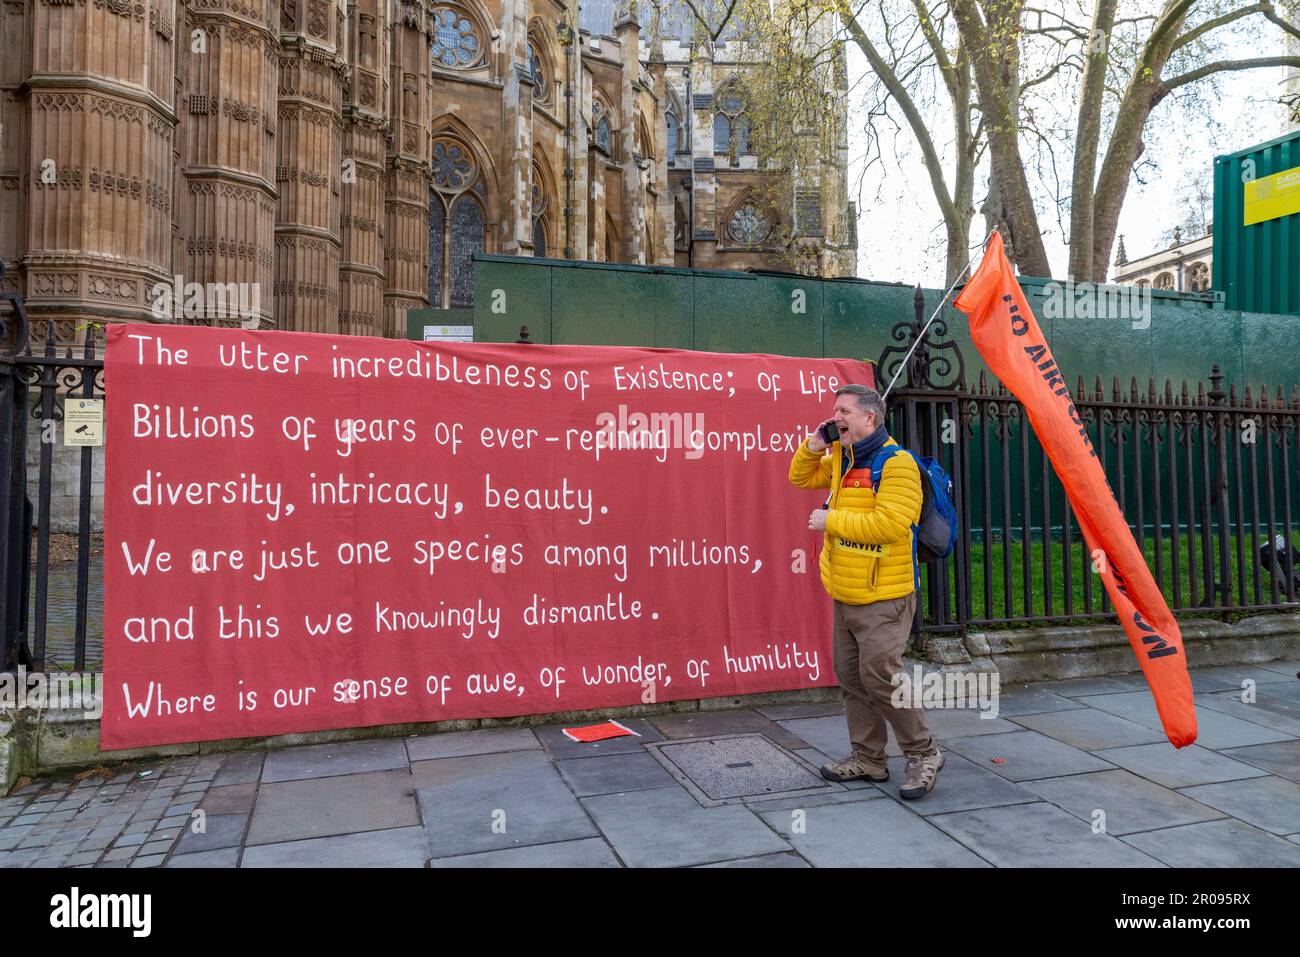 Quote at Extinction Rebellion encampment in Parliament area, London, UK. The utter incredibleness of Existence; of Life...diversity...complexity Stock Photo